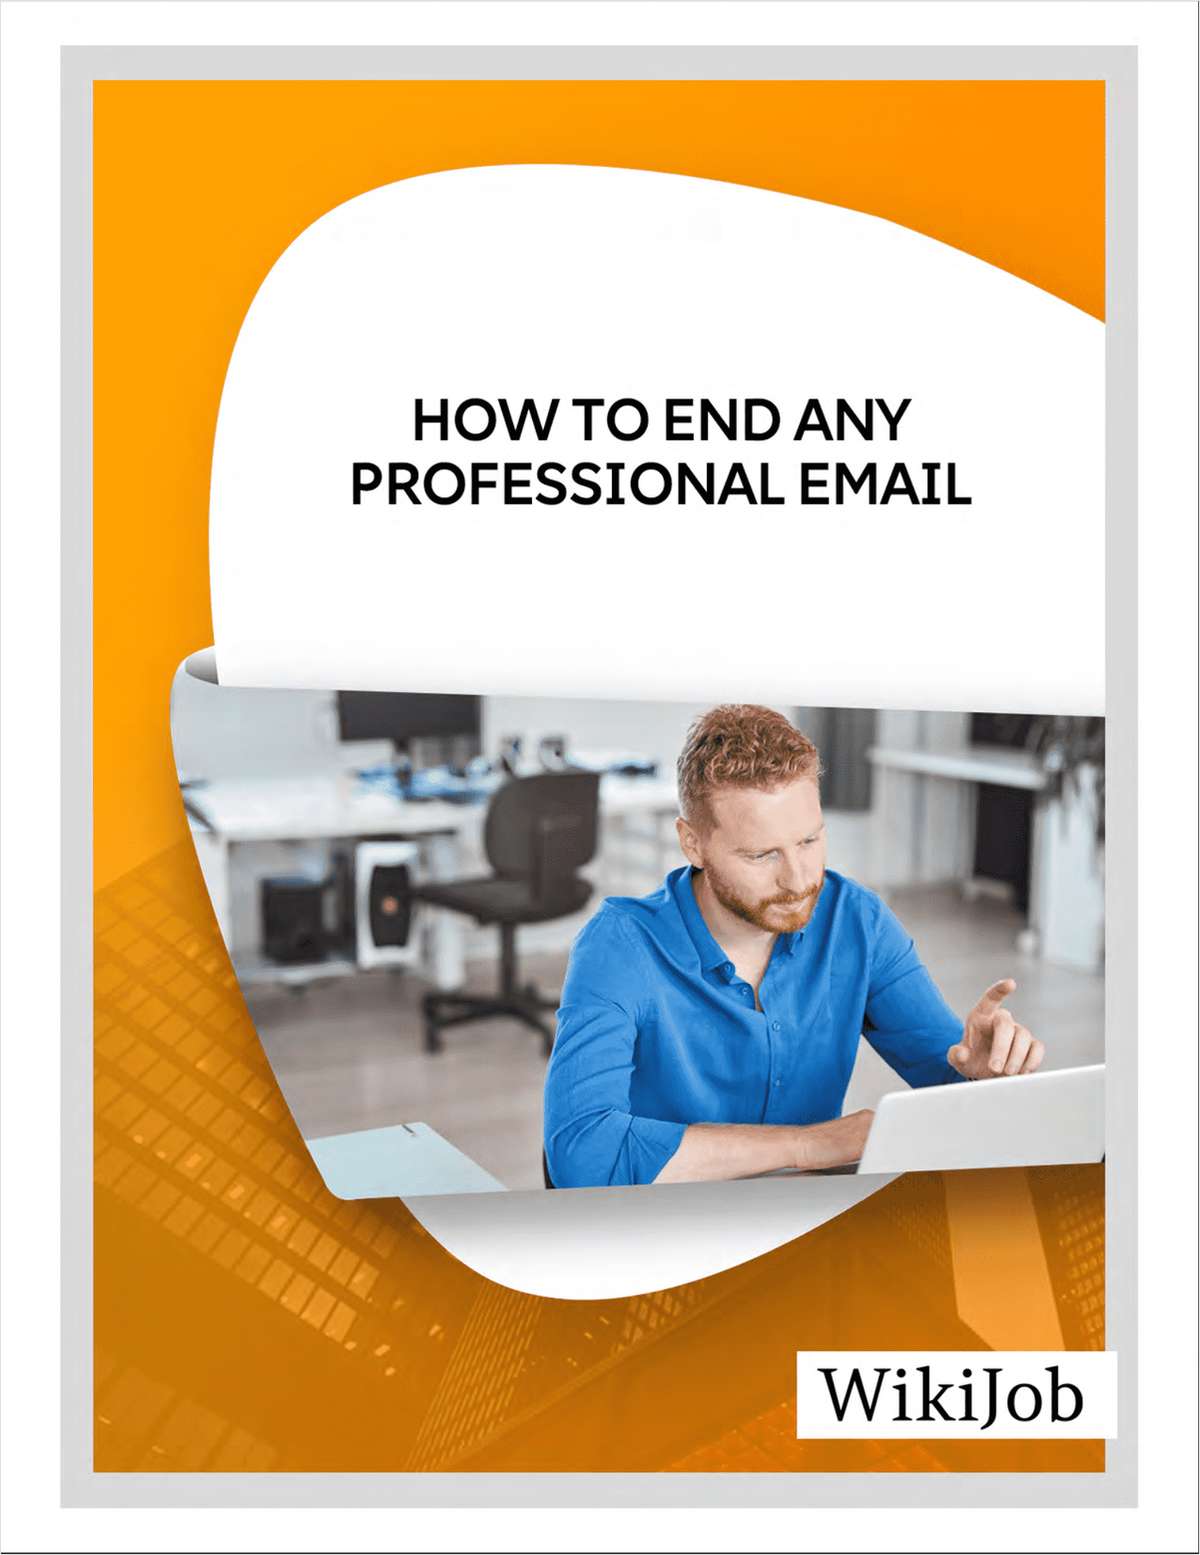 How to End Any Professional Email